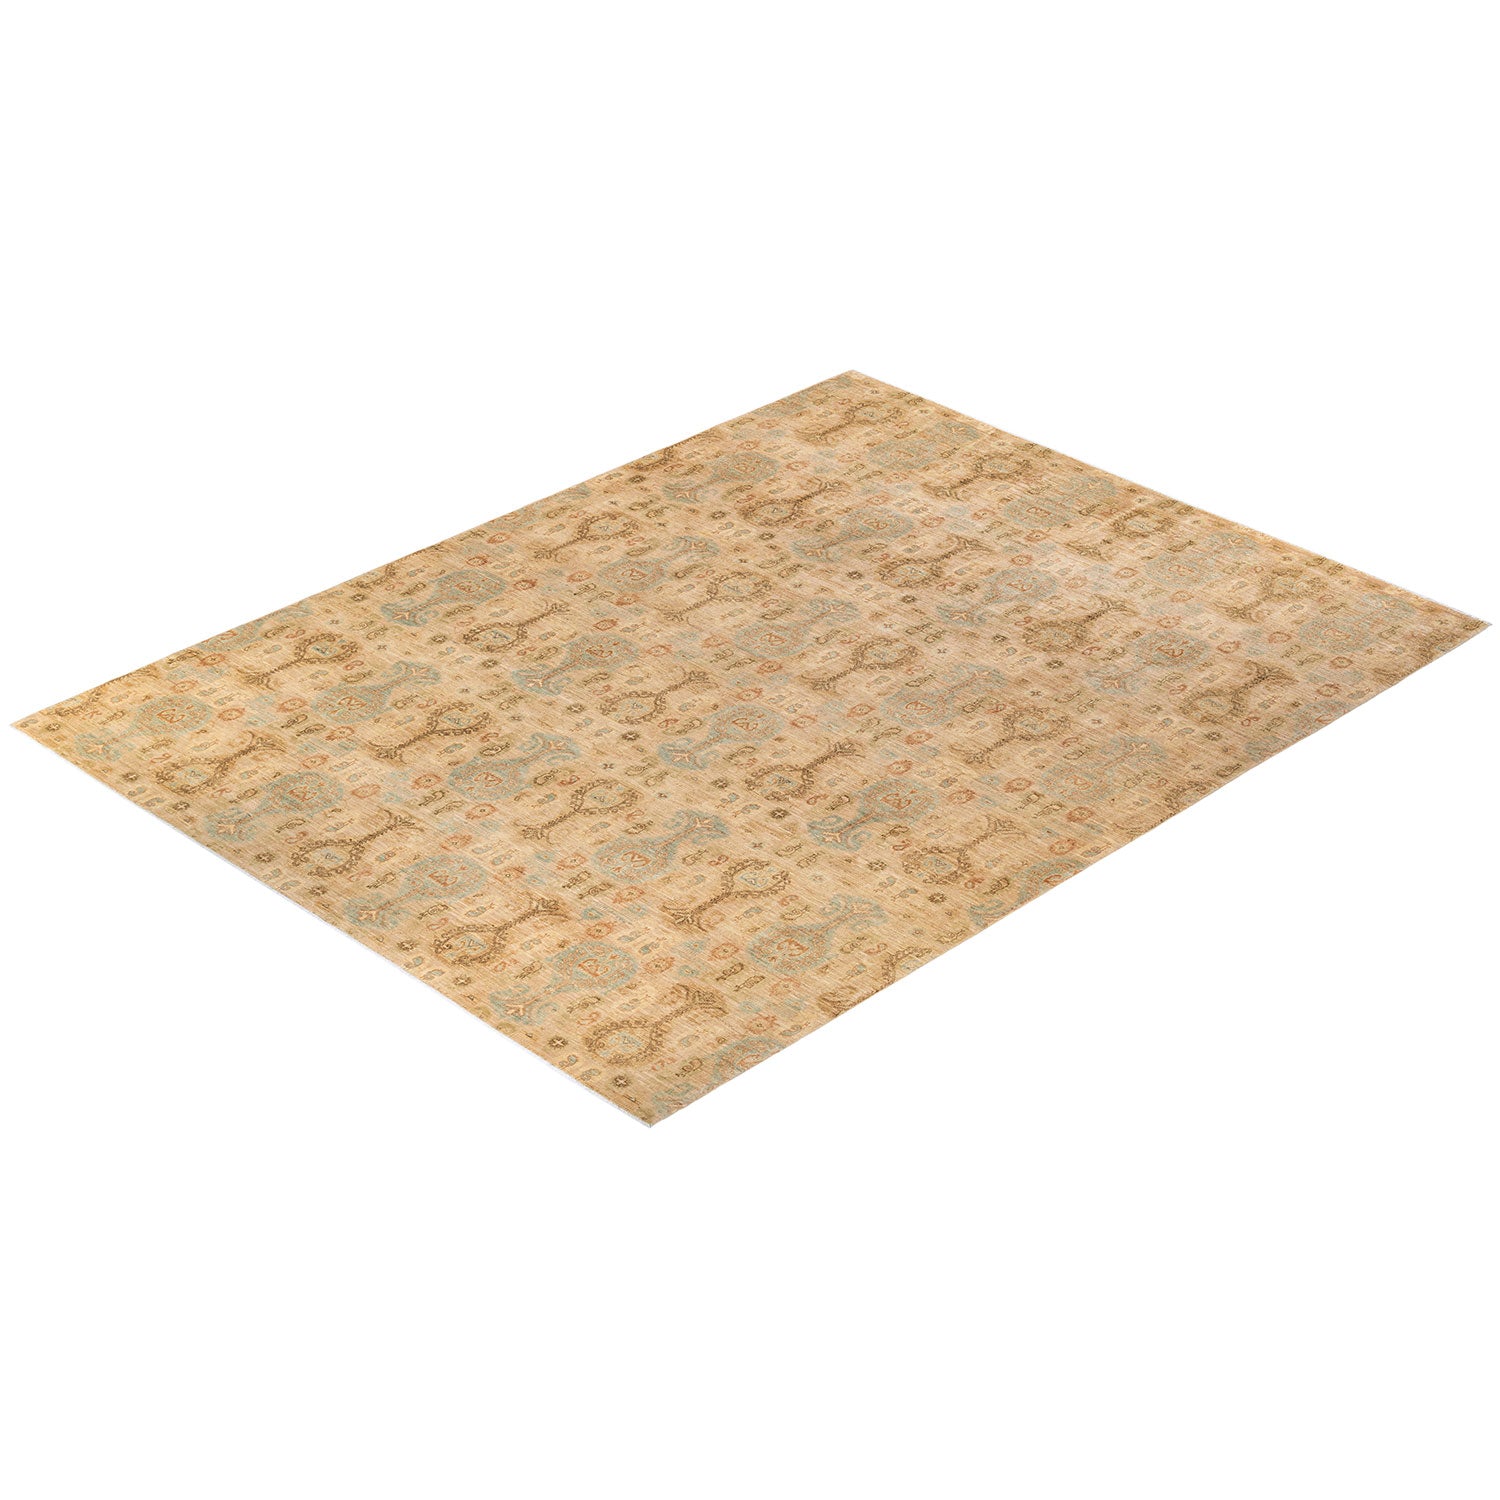 Vintage-inspired rectangular area rug with intricate Oriental motifs and muted tones.